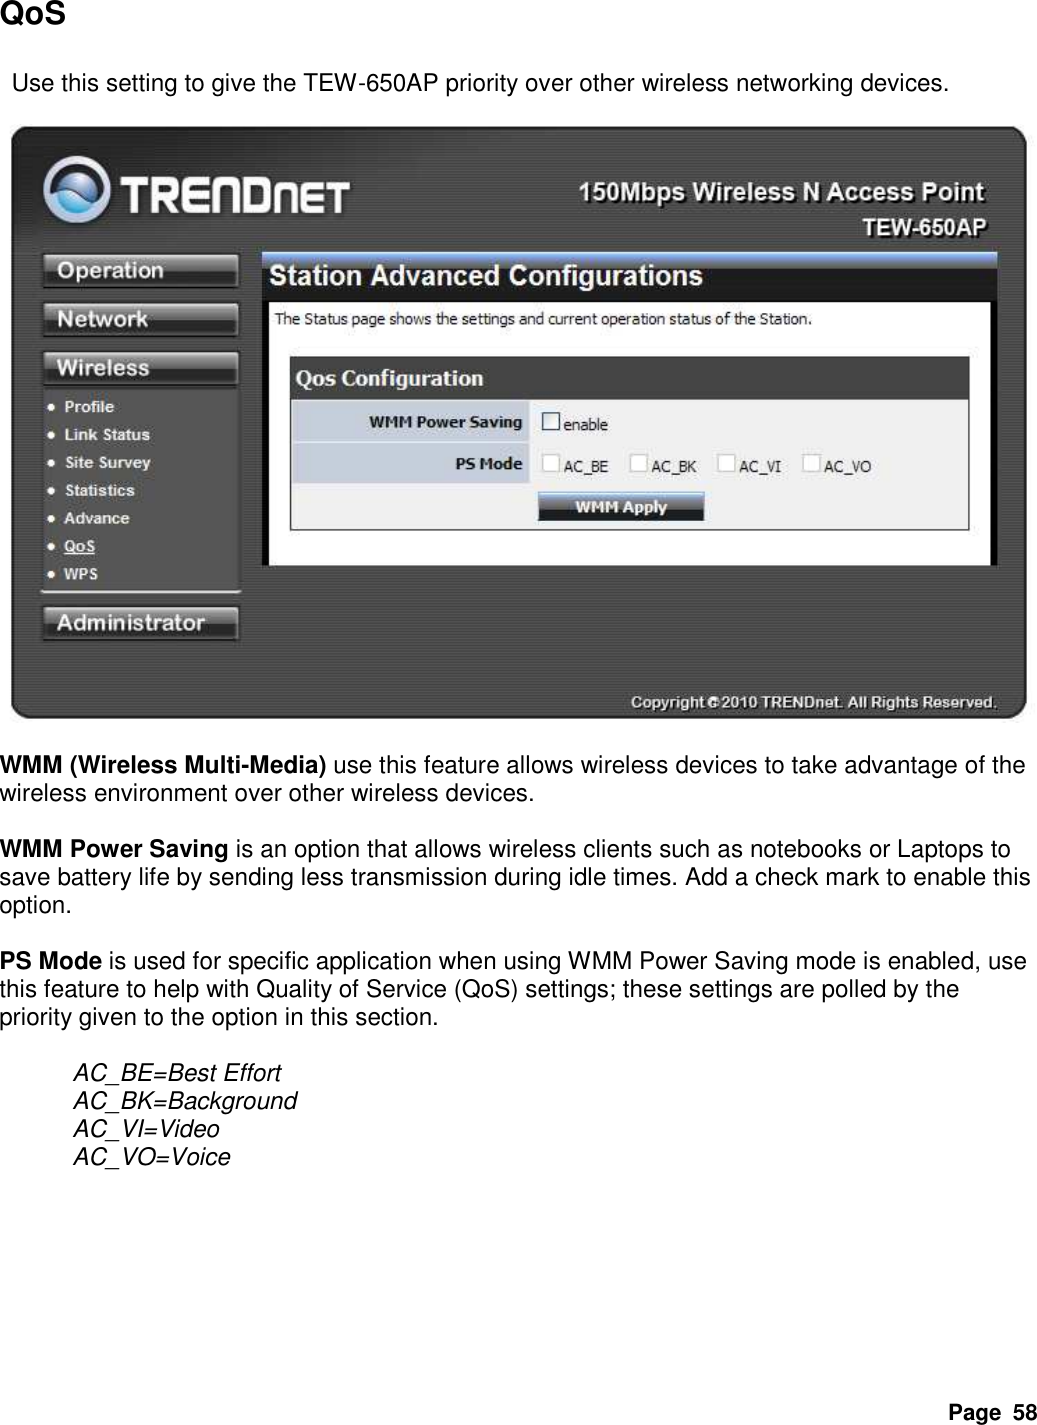 Page  58 QoS    Use this setting to give the TEW-650AP priority over other wireless networking devices.    WMM (Wireless Multi-Media) use this feature allows wireless devices to take advantage of the wireless environment over other wireless devices.  WMM Power Saving is an option that allows wireless clients such as notebooks or Laptops to save battery life by sending less transmission during idle times. Add a check mark to enable this option.    PS Mode is used for specific application when using WMM Power Saving mode is enabled, use this feature to help with Quality of Service (QoS) settings; these settings are polled by the priority given to the option in this section.    AC_BE=Best Effort   AC_BK=Background       AC_VI=Video   AC_VO=Voice        